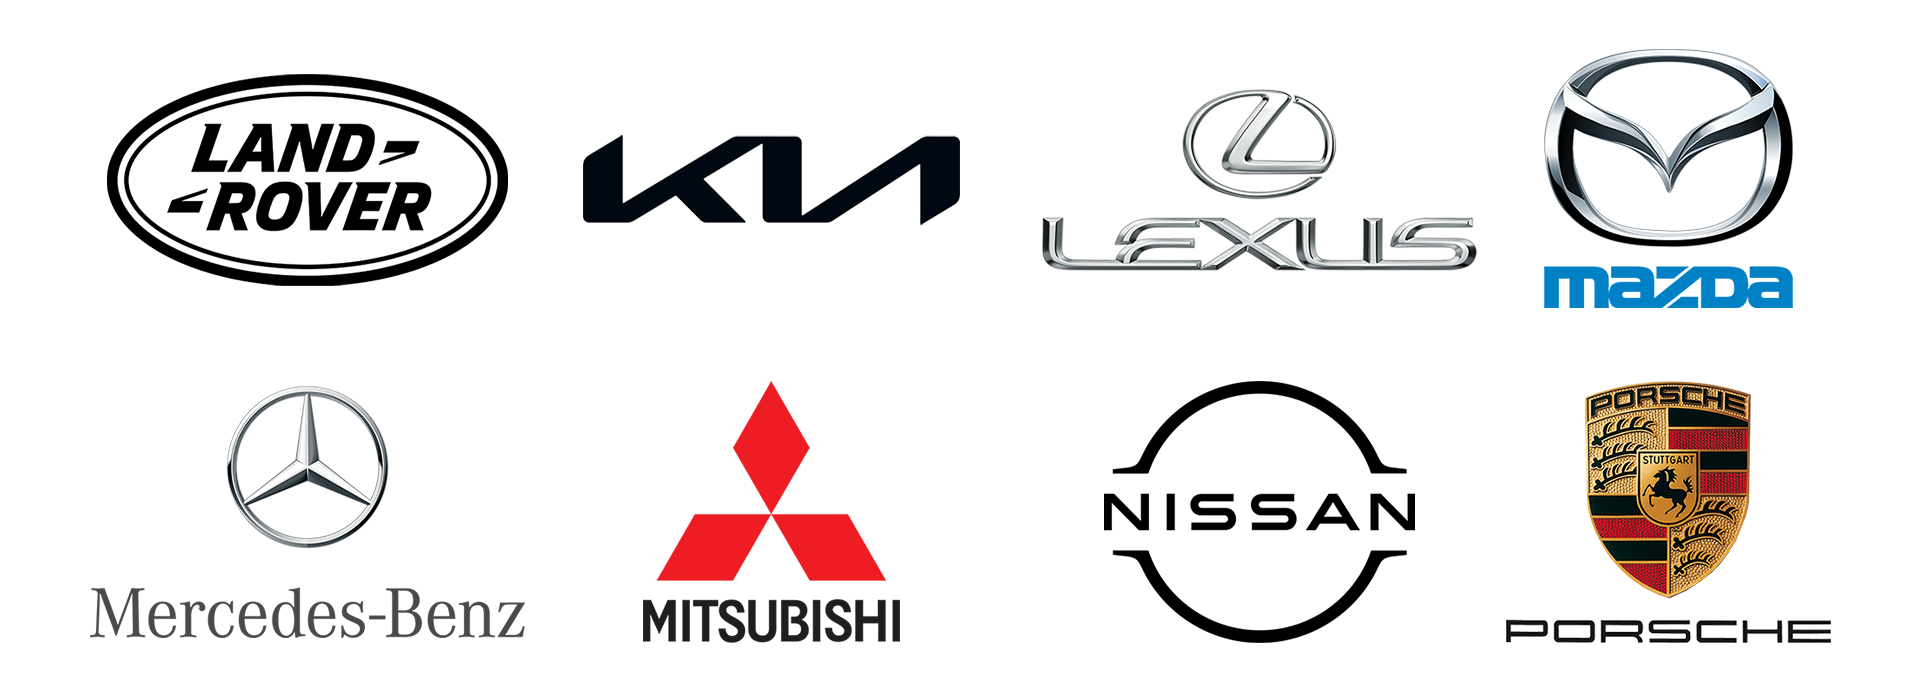 A bunch of car logos on a white background